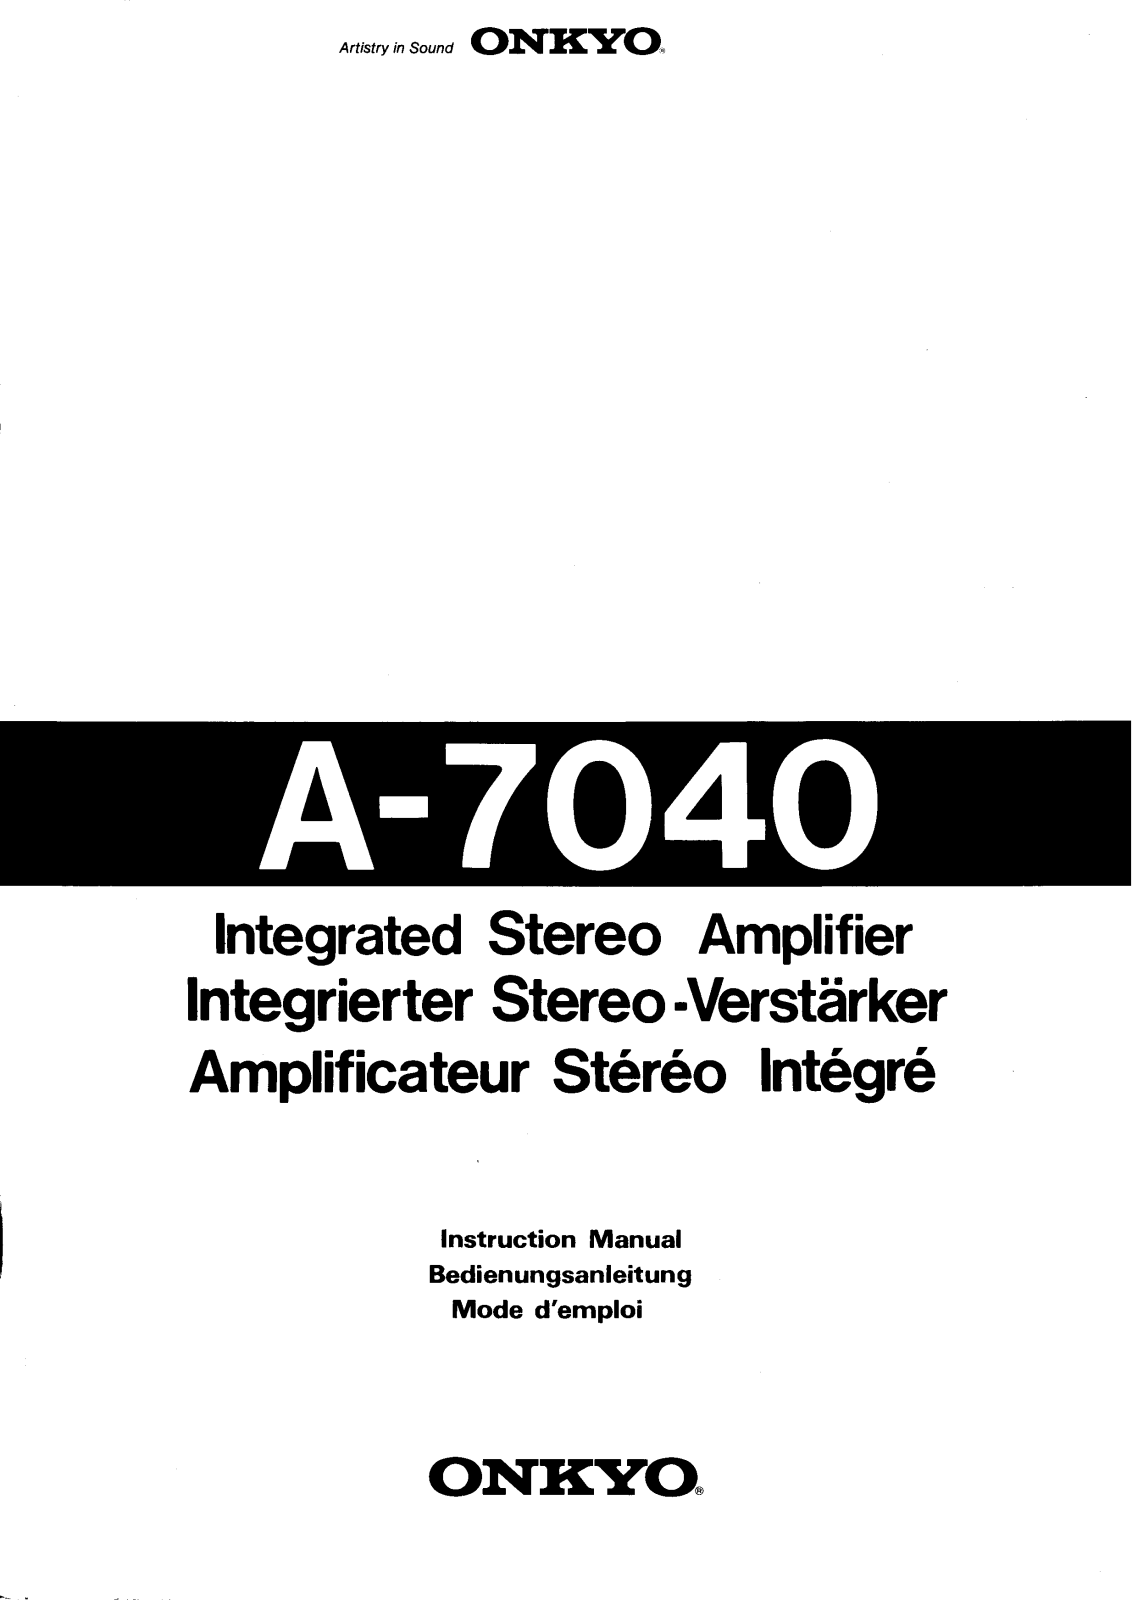 Onkyo A-7040 Owners Manual